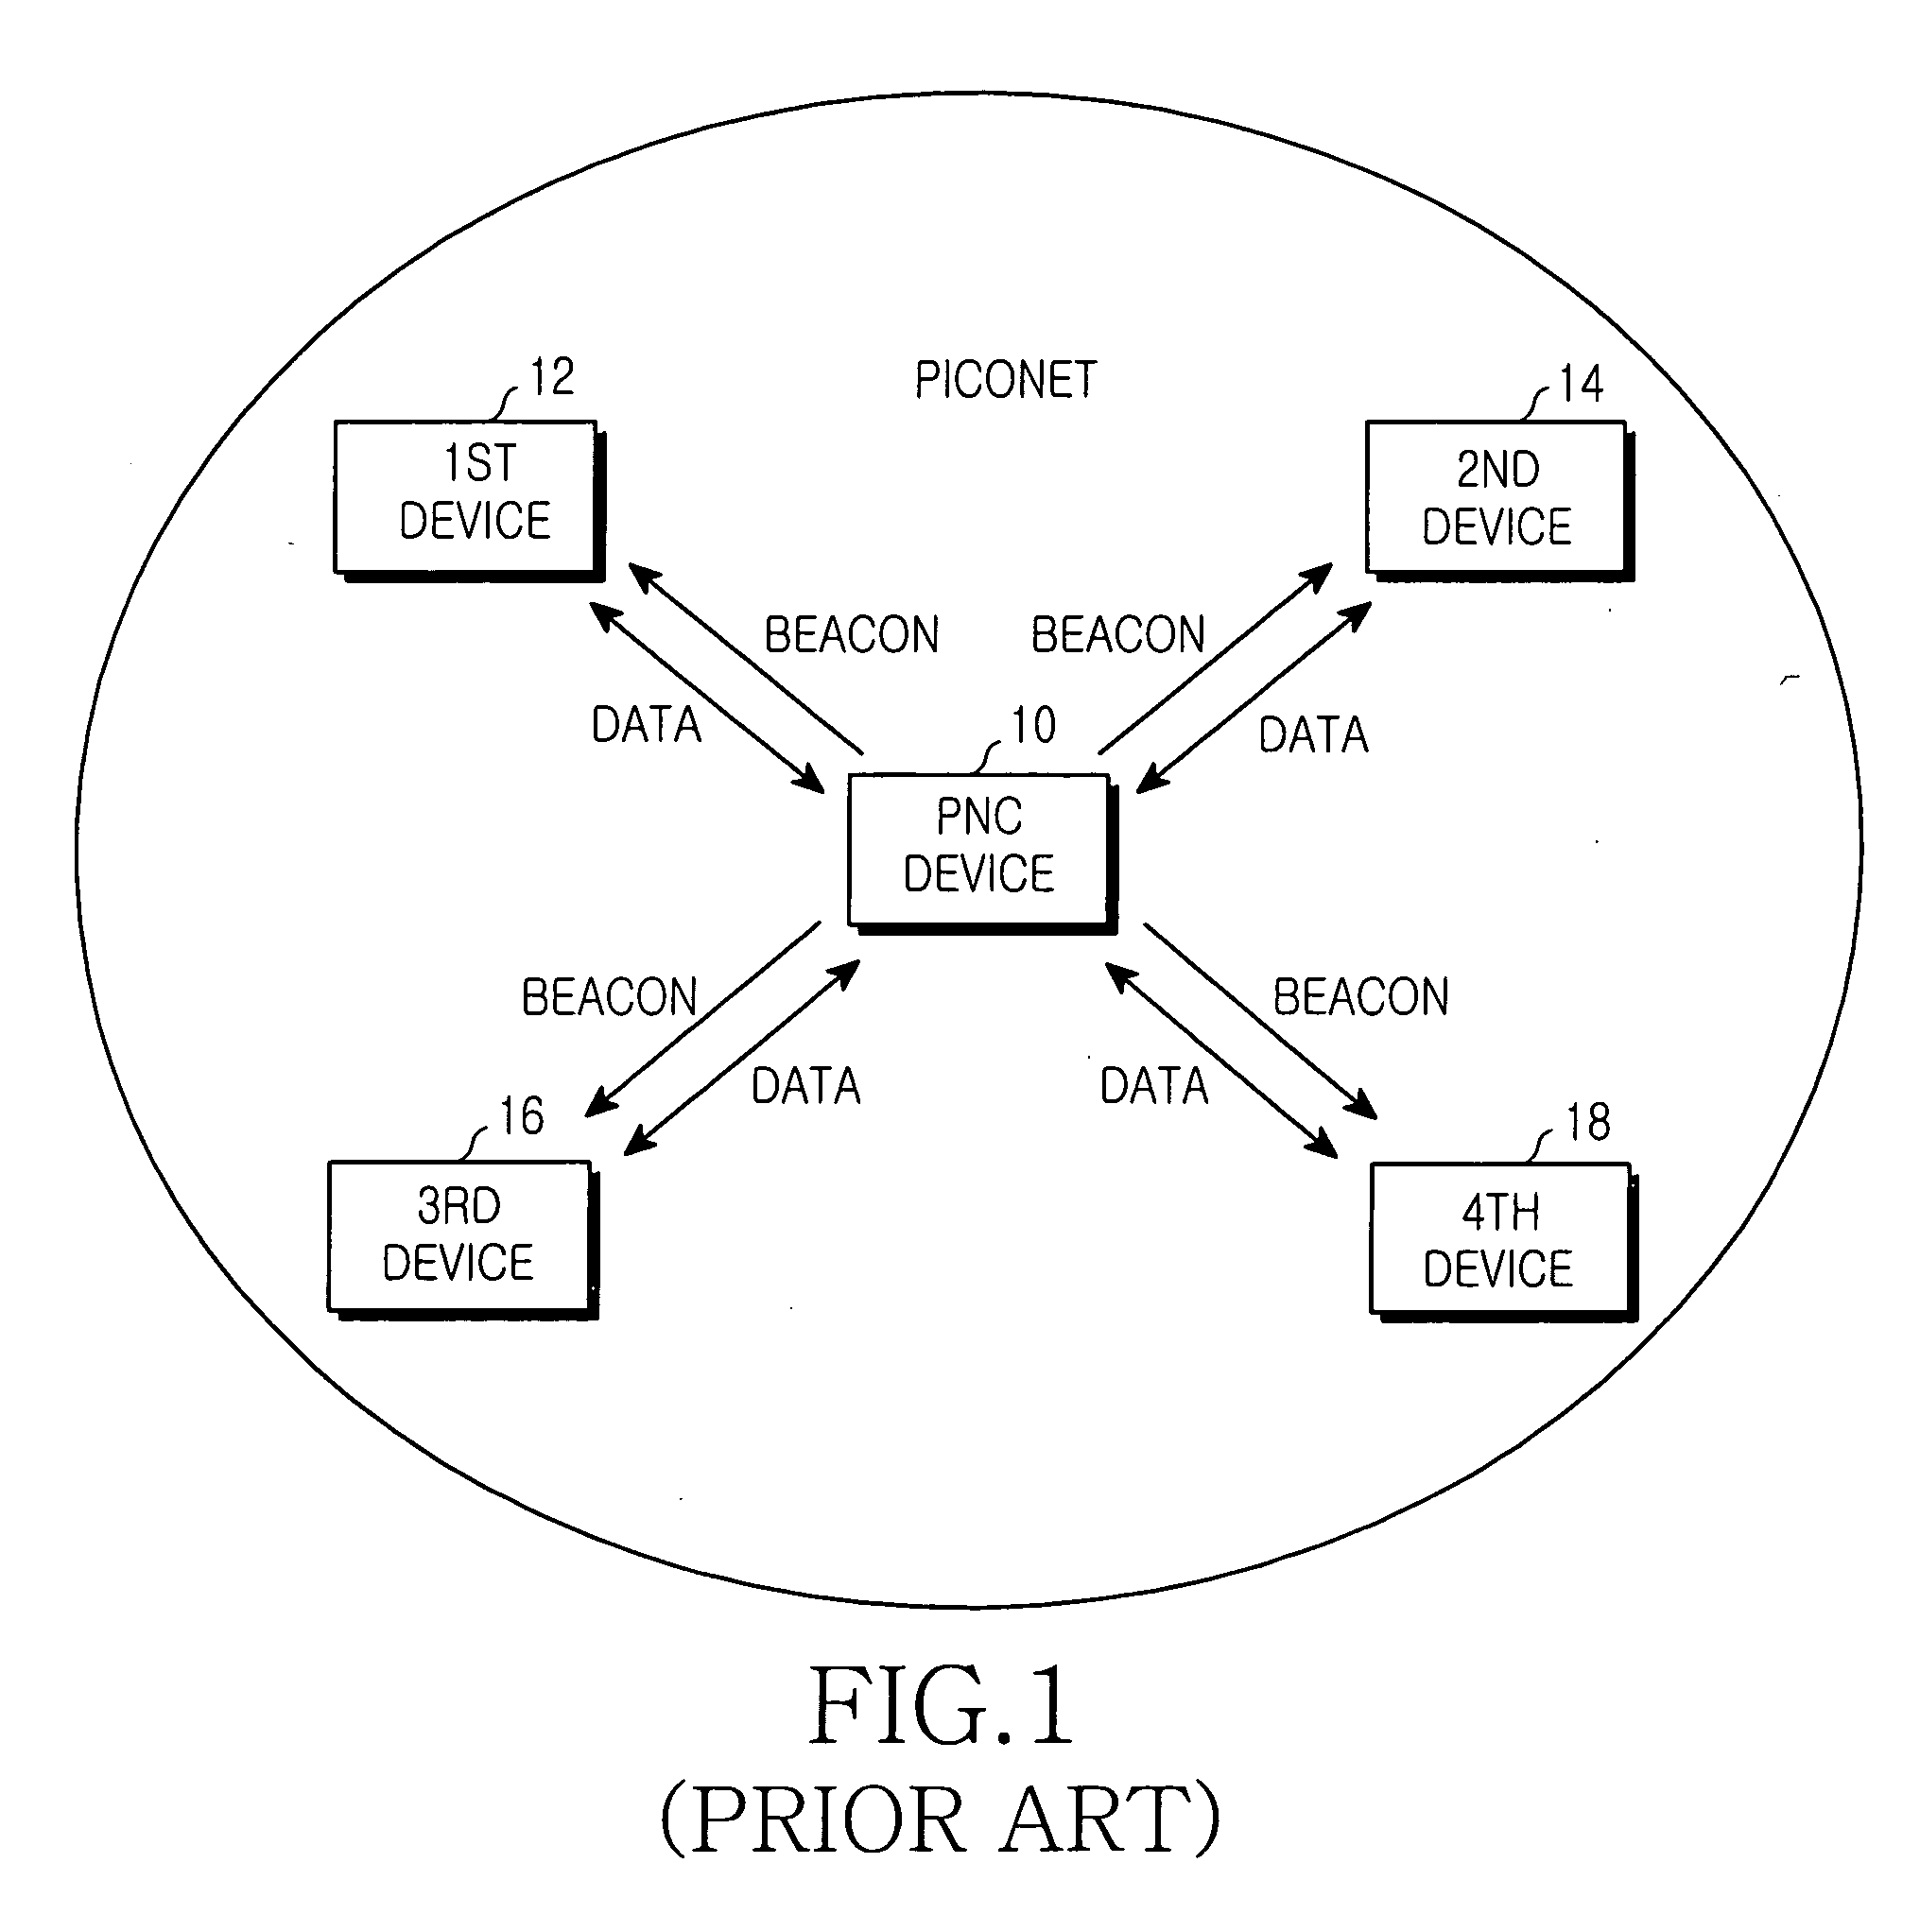 High-speed wireless personal area network system for extending service area